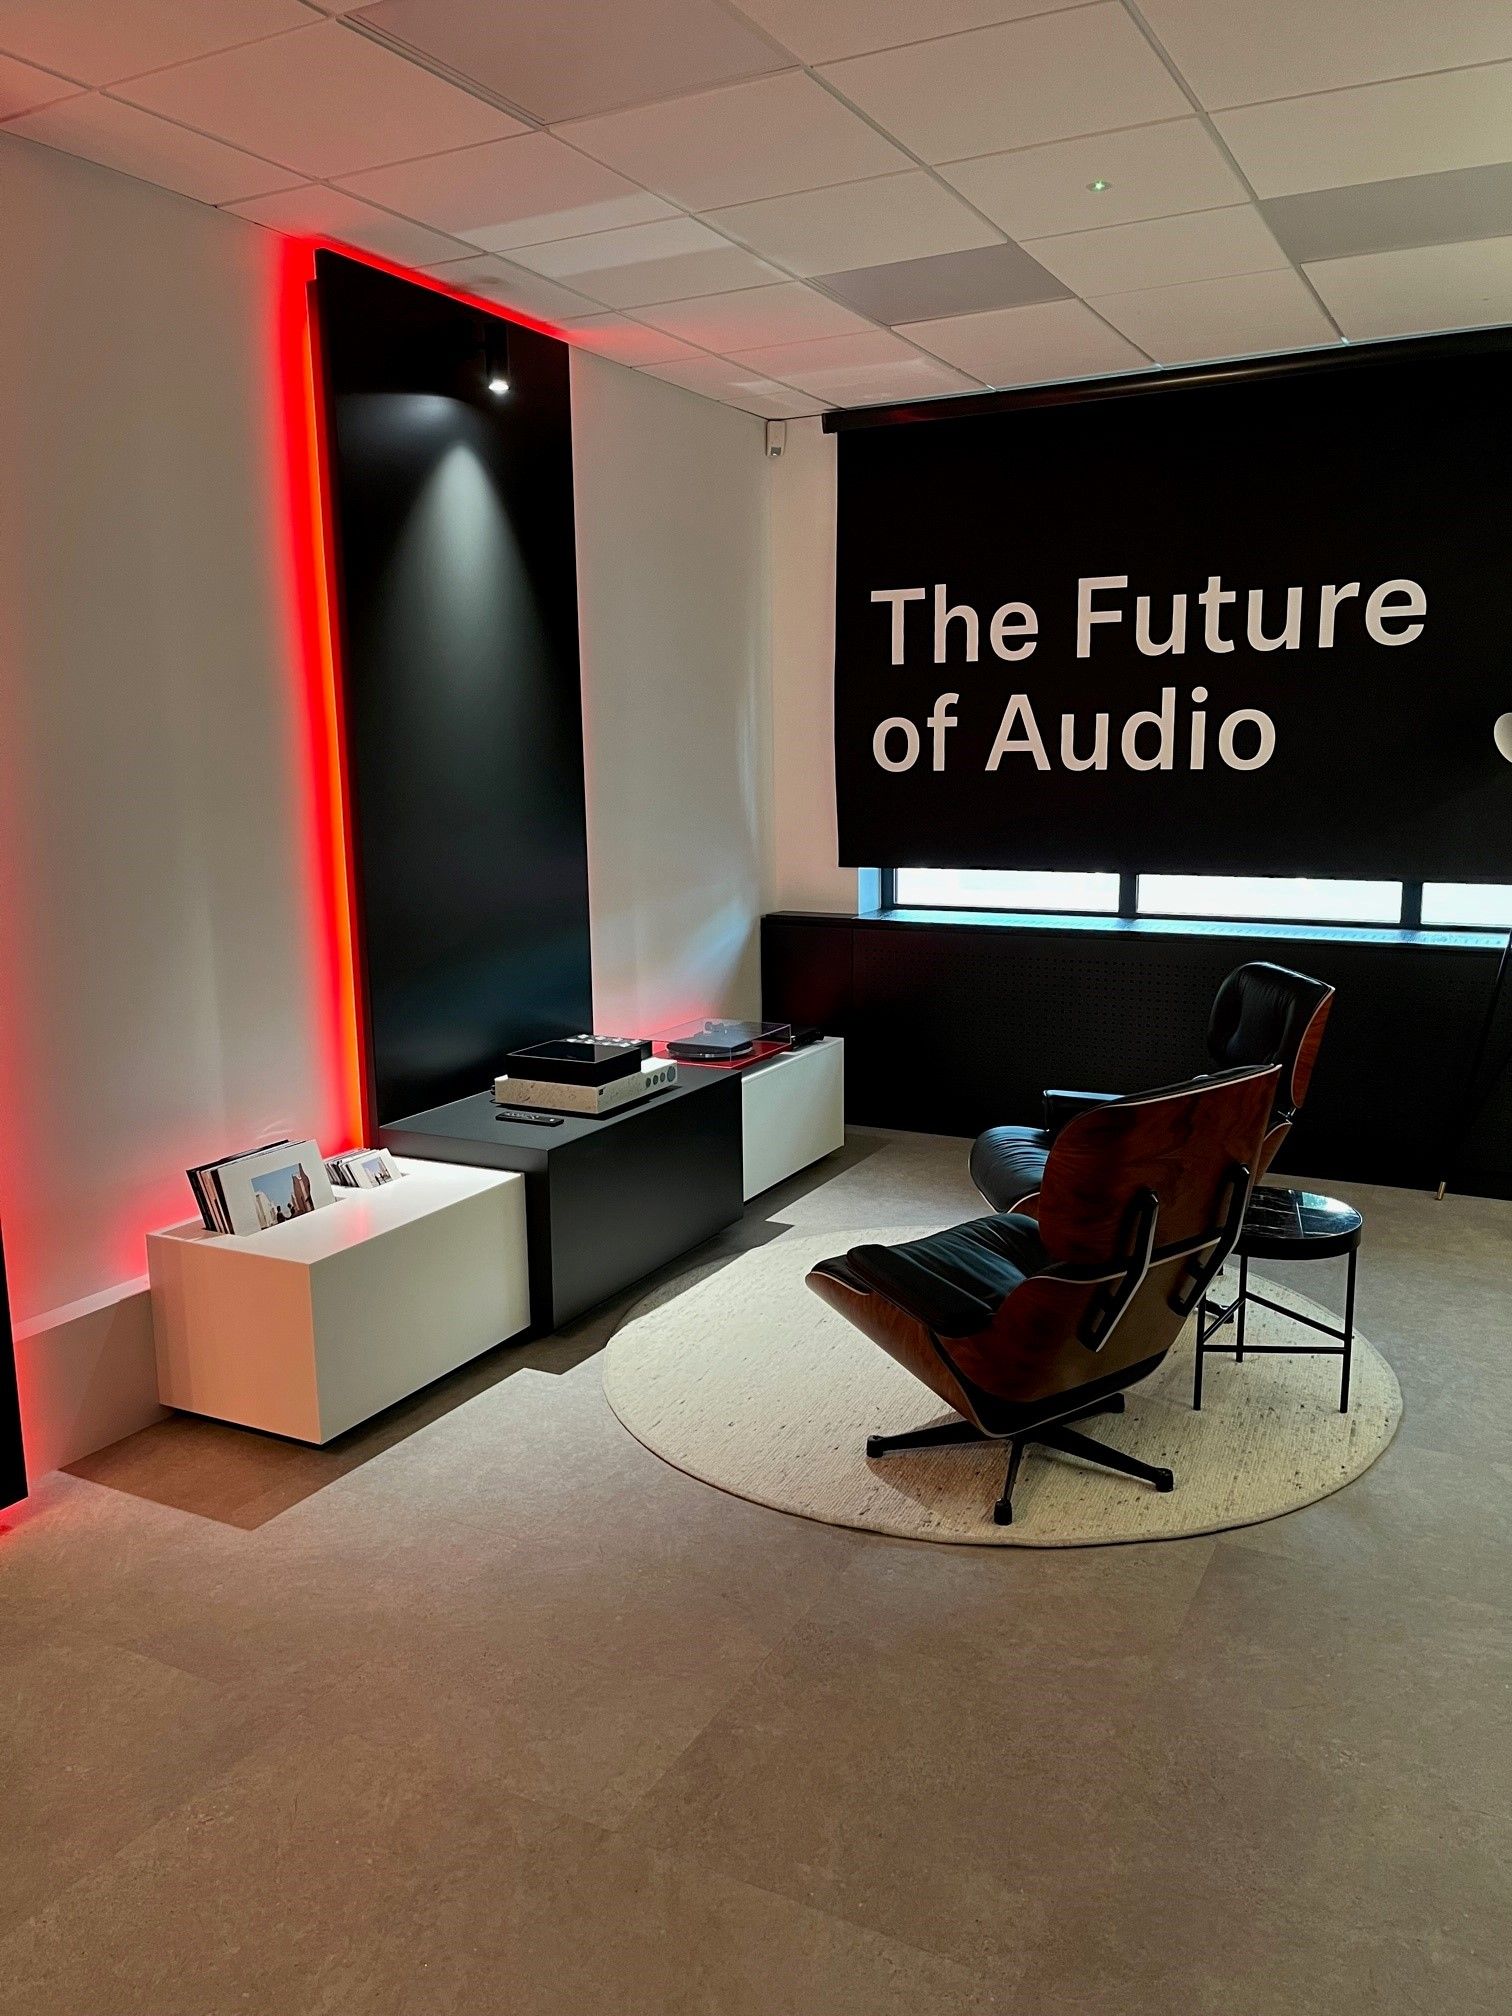 The Listening Room in the Audiophile Experience Centre